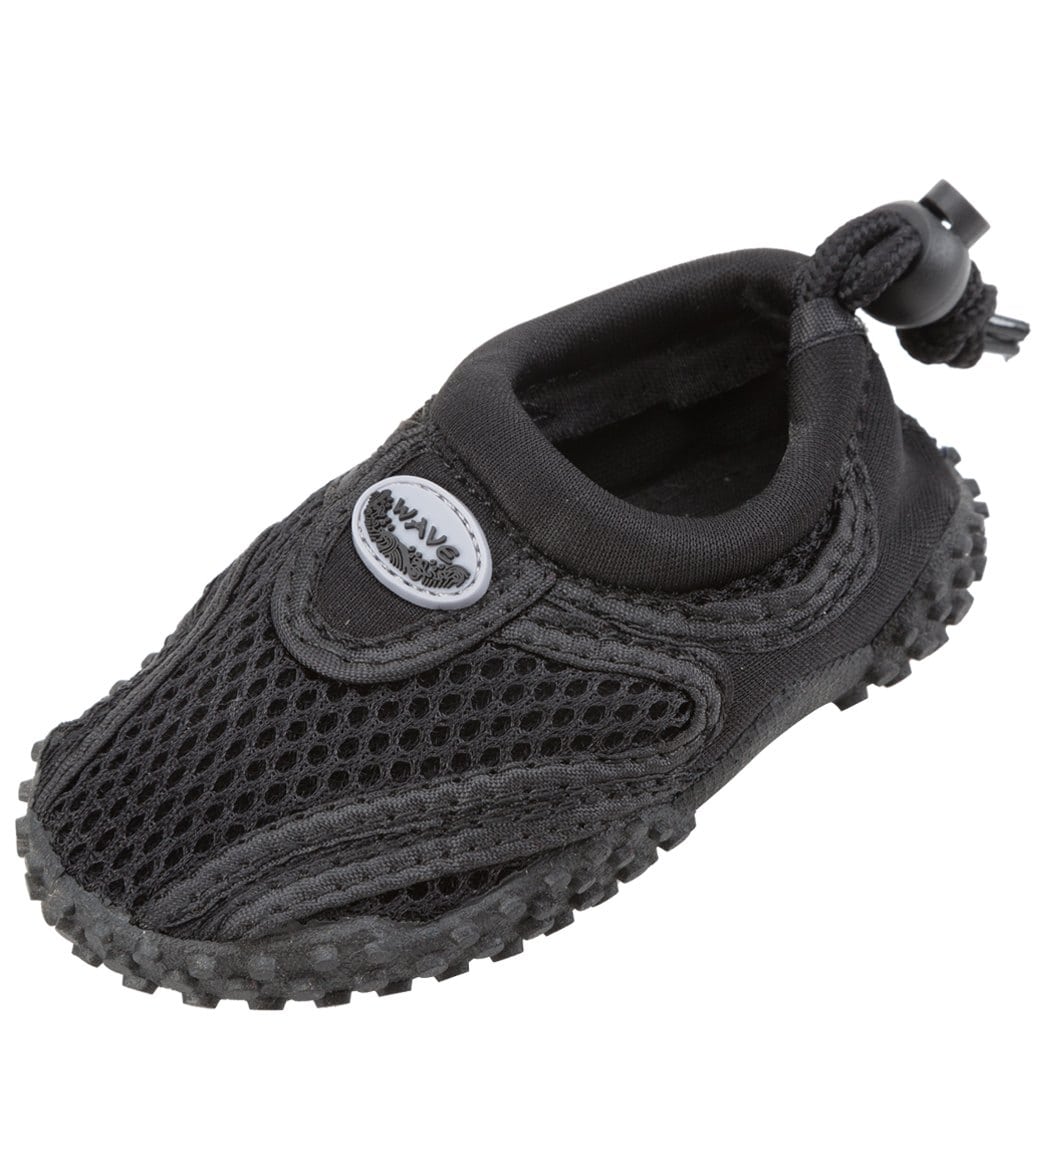 Easy USA Infants Water Shoes